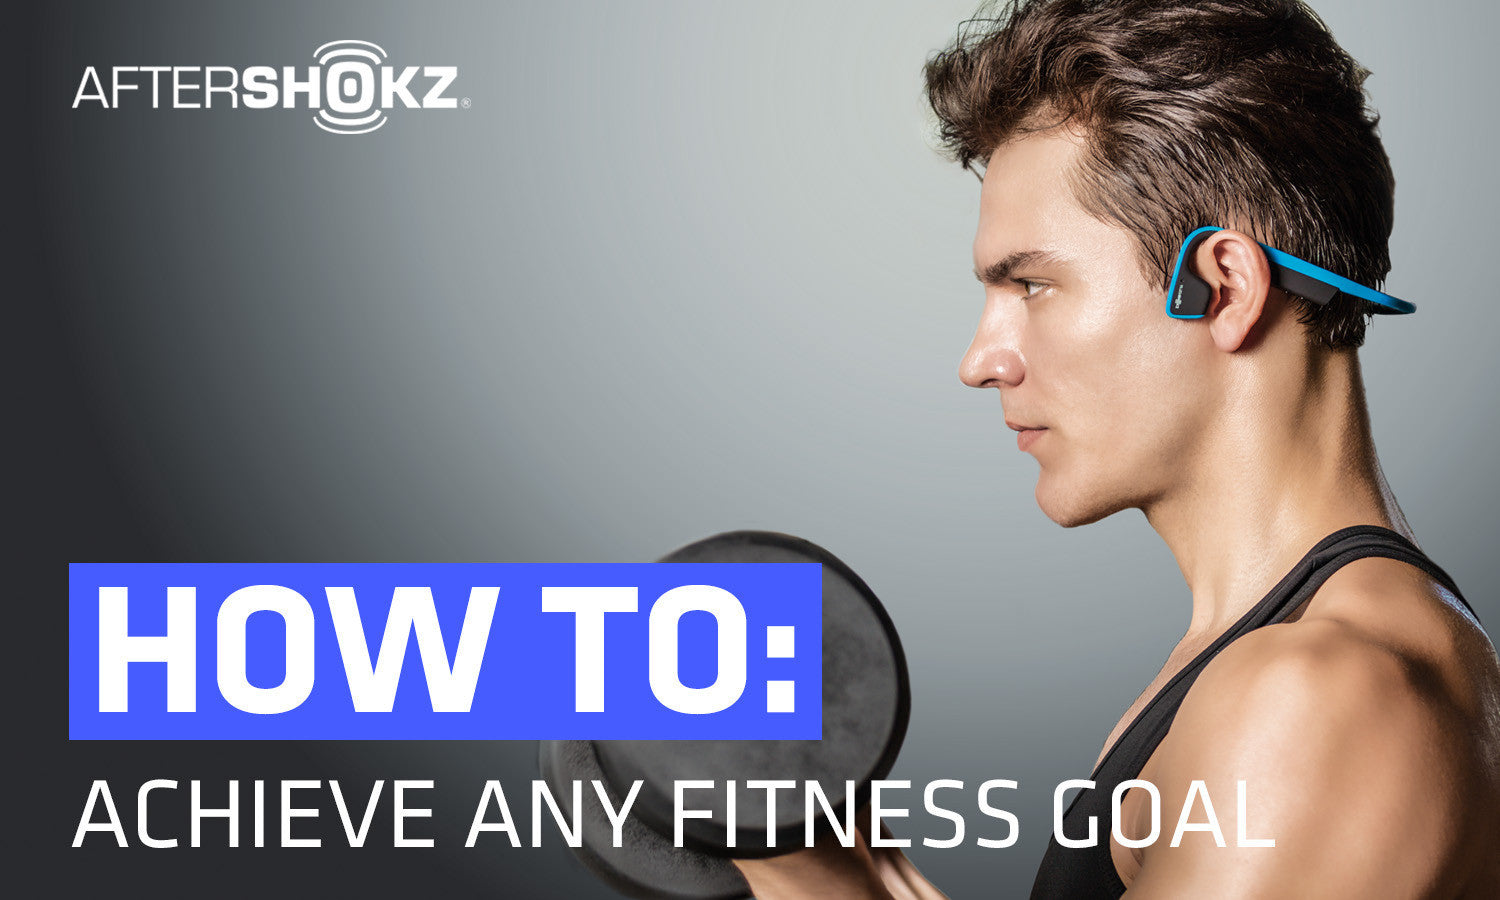 How To: Achieve Any Fitness Goal